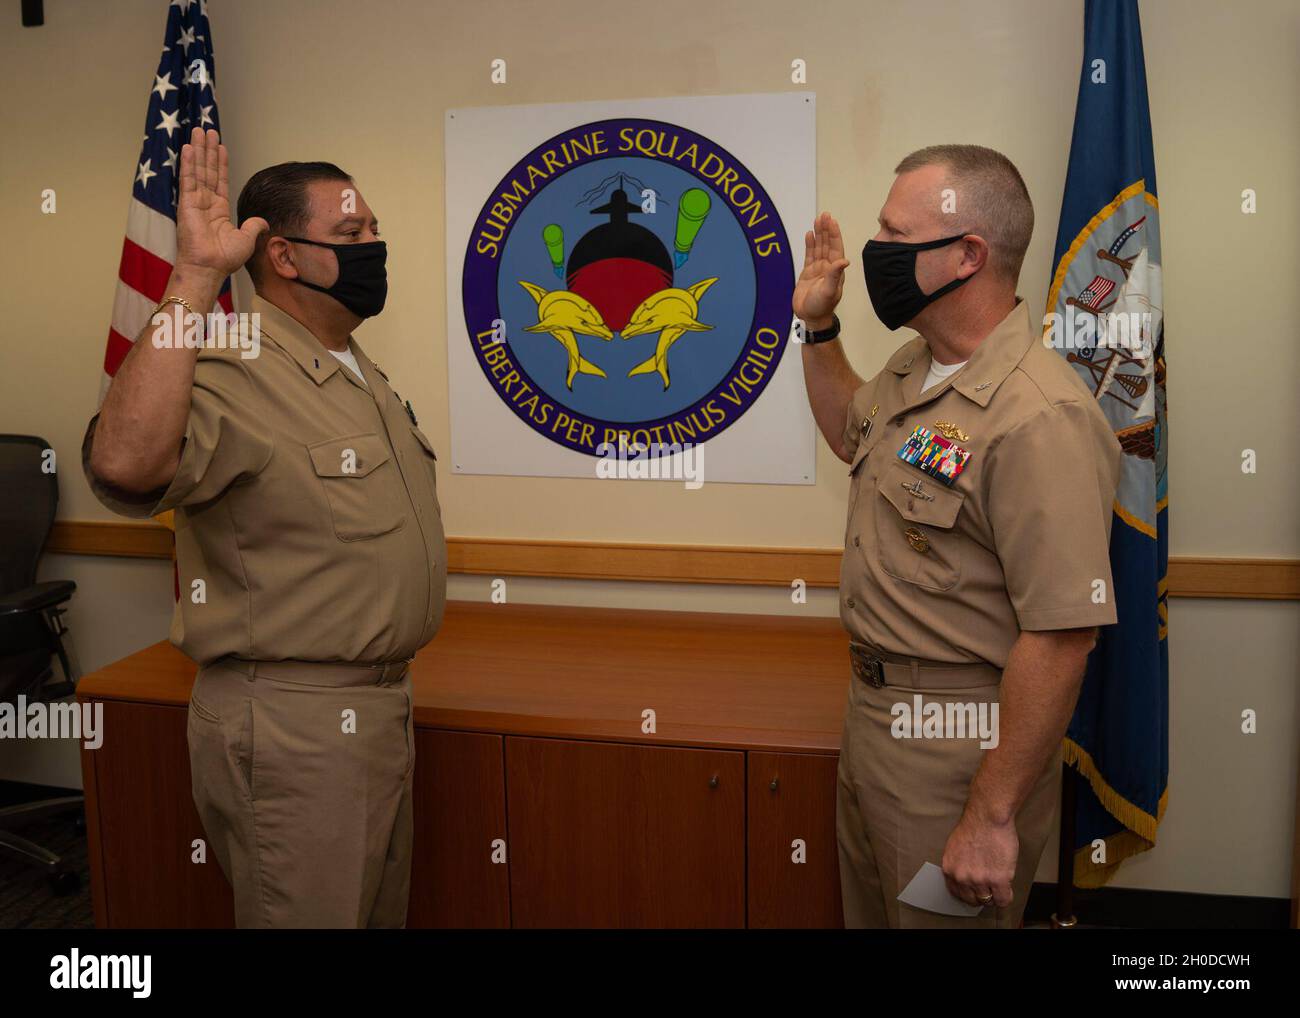 NAVAL BASE GUAM, Guam (Feb. 2, 2021) - Chief Warrant Officer Andrew De La O, from San Antonio, Texas (left), and Capt. Bret Grabbe, commander, Submarine Squadron 15, recite the oath of office during a promotion ceremony held at Konetzni Hall. Commander, Submarine Squadron 15 is responsible for providing training, material, and personnel readiness support to multiple Los Angeles-class fast-attack submarine commands located at Polaris Point, Naval Base Guam. Stock Photo